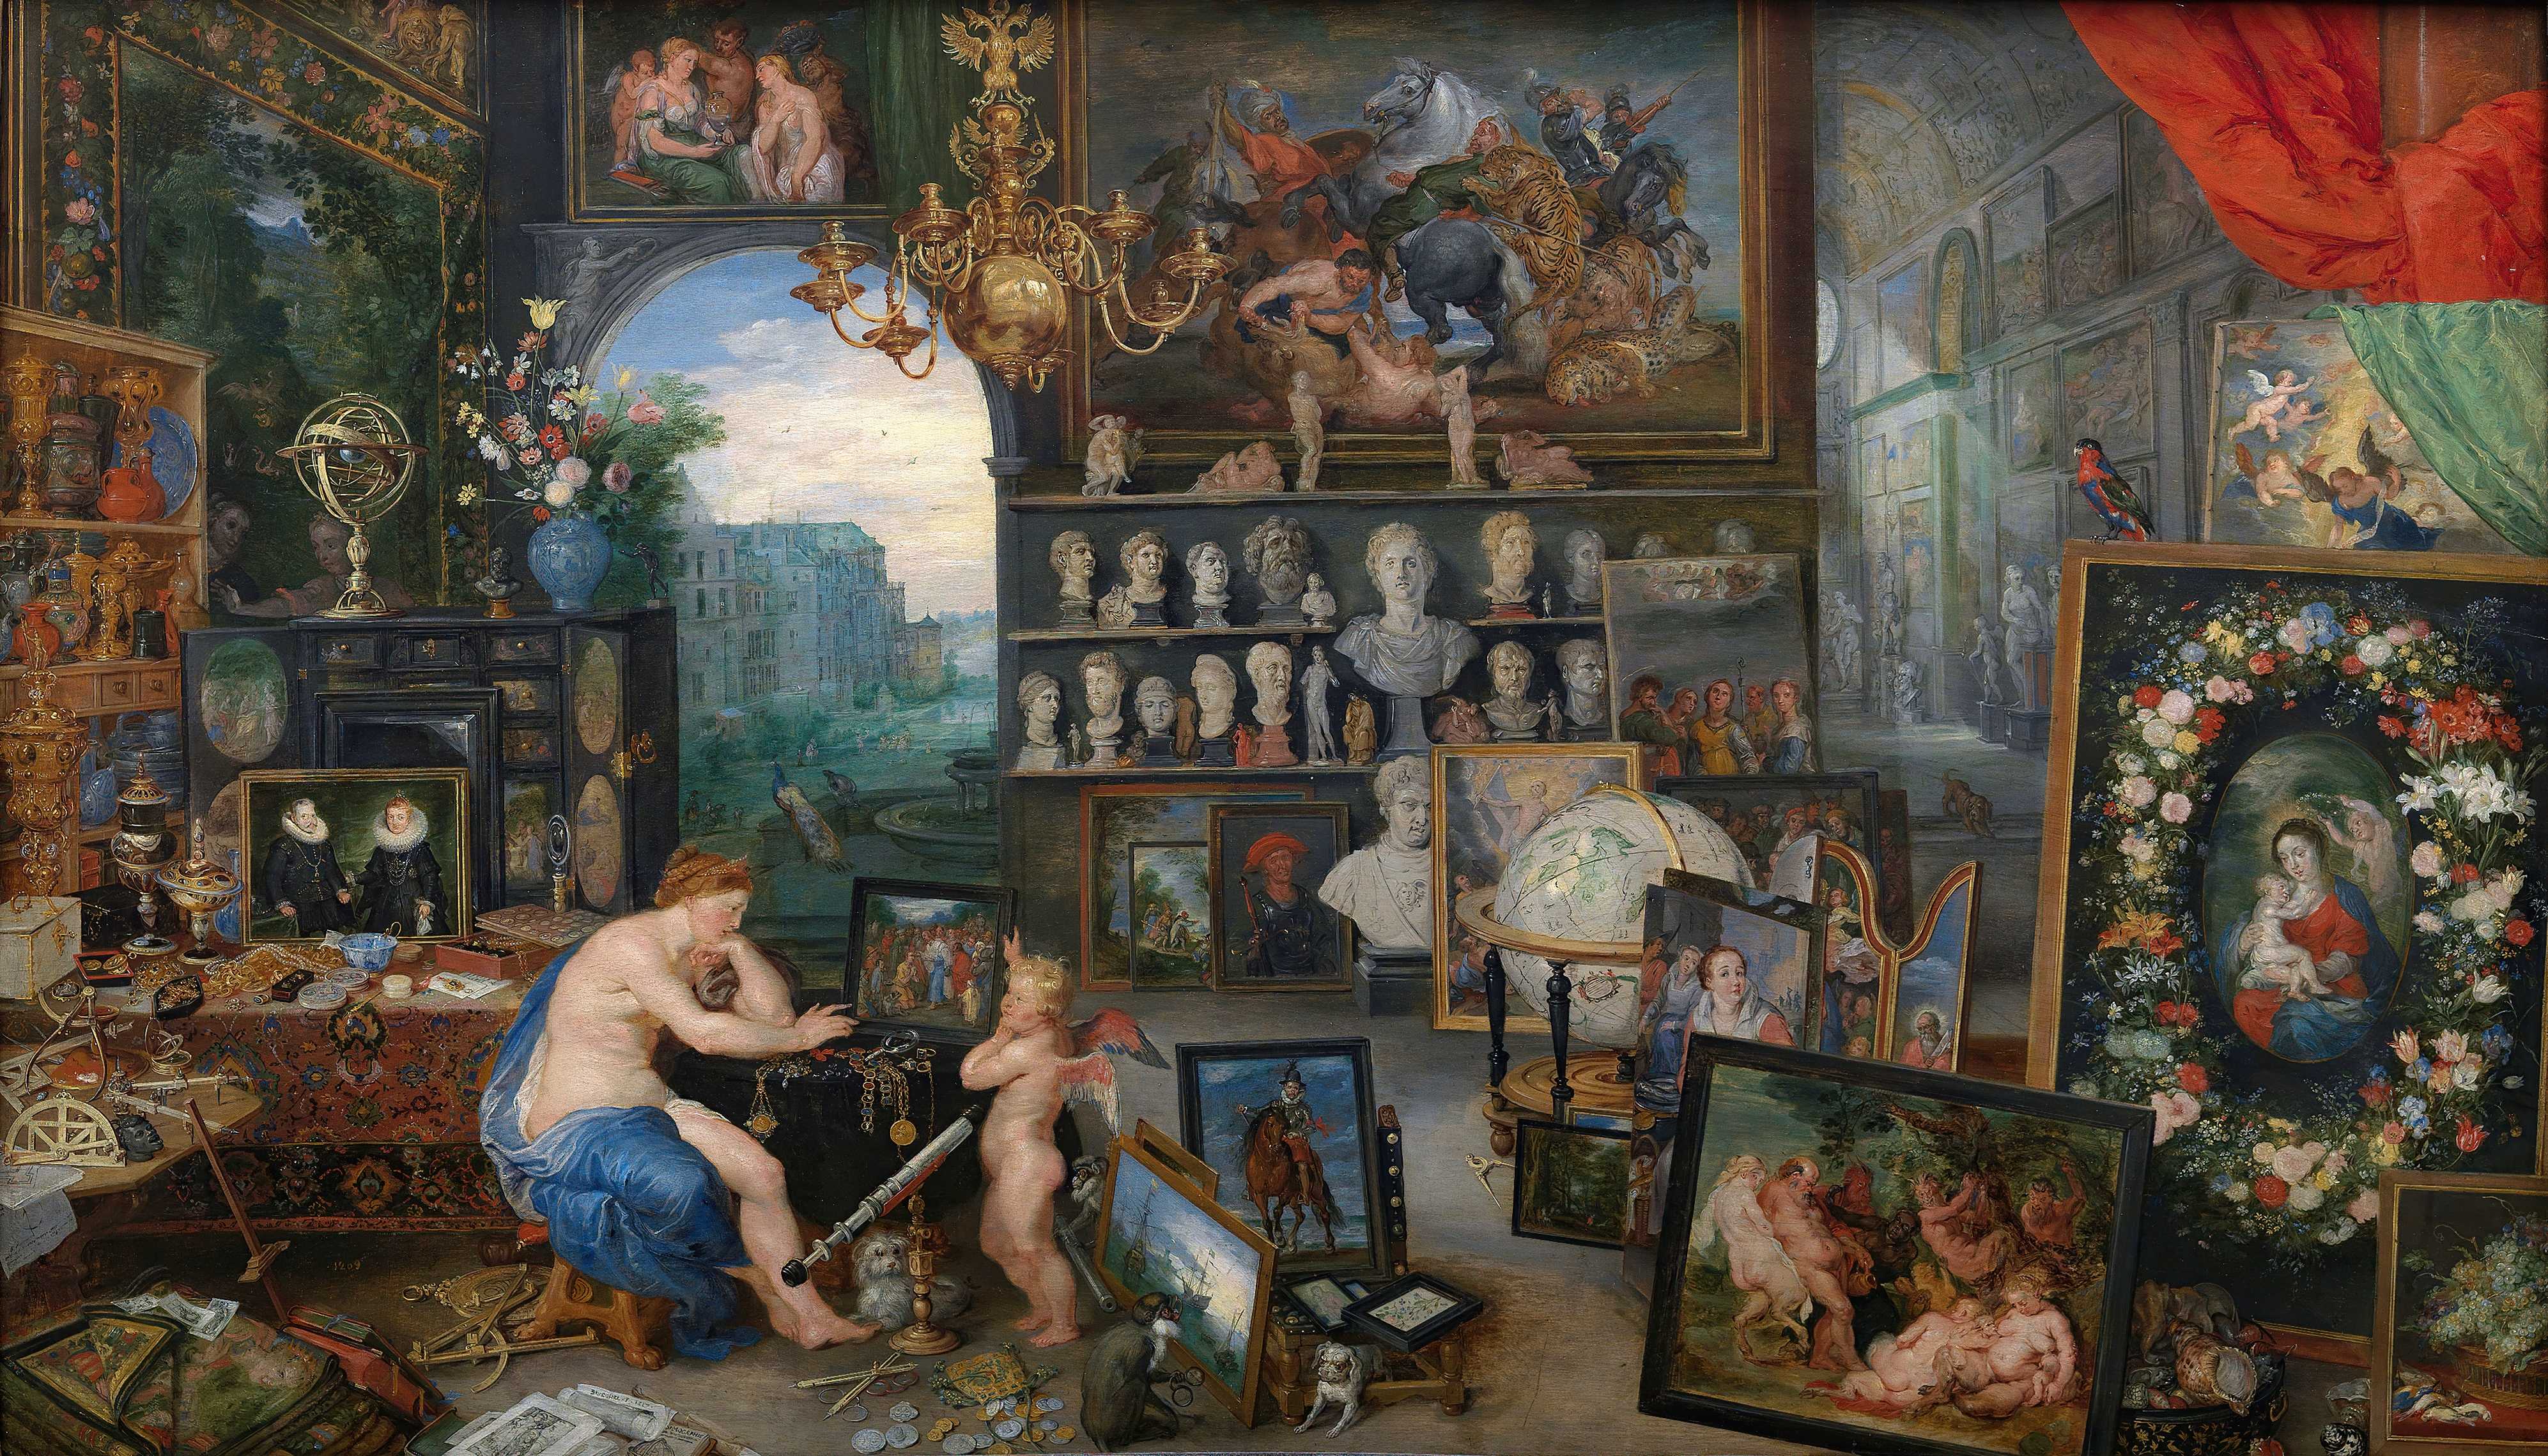 Find out more about Peter Paul Rubens - Sight